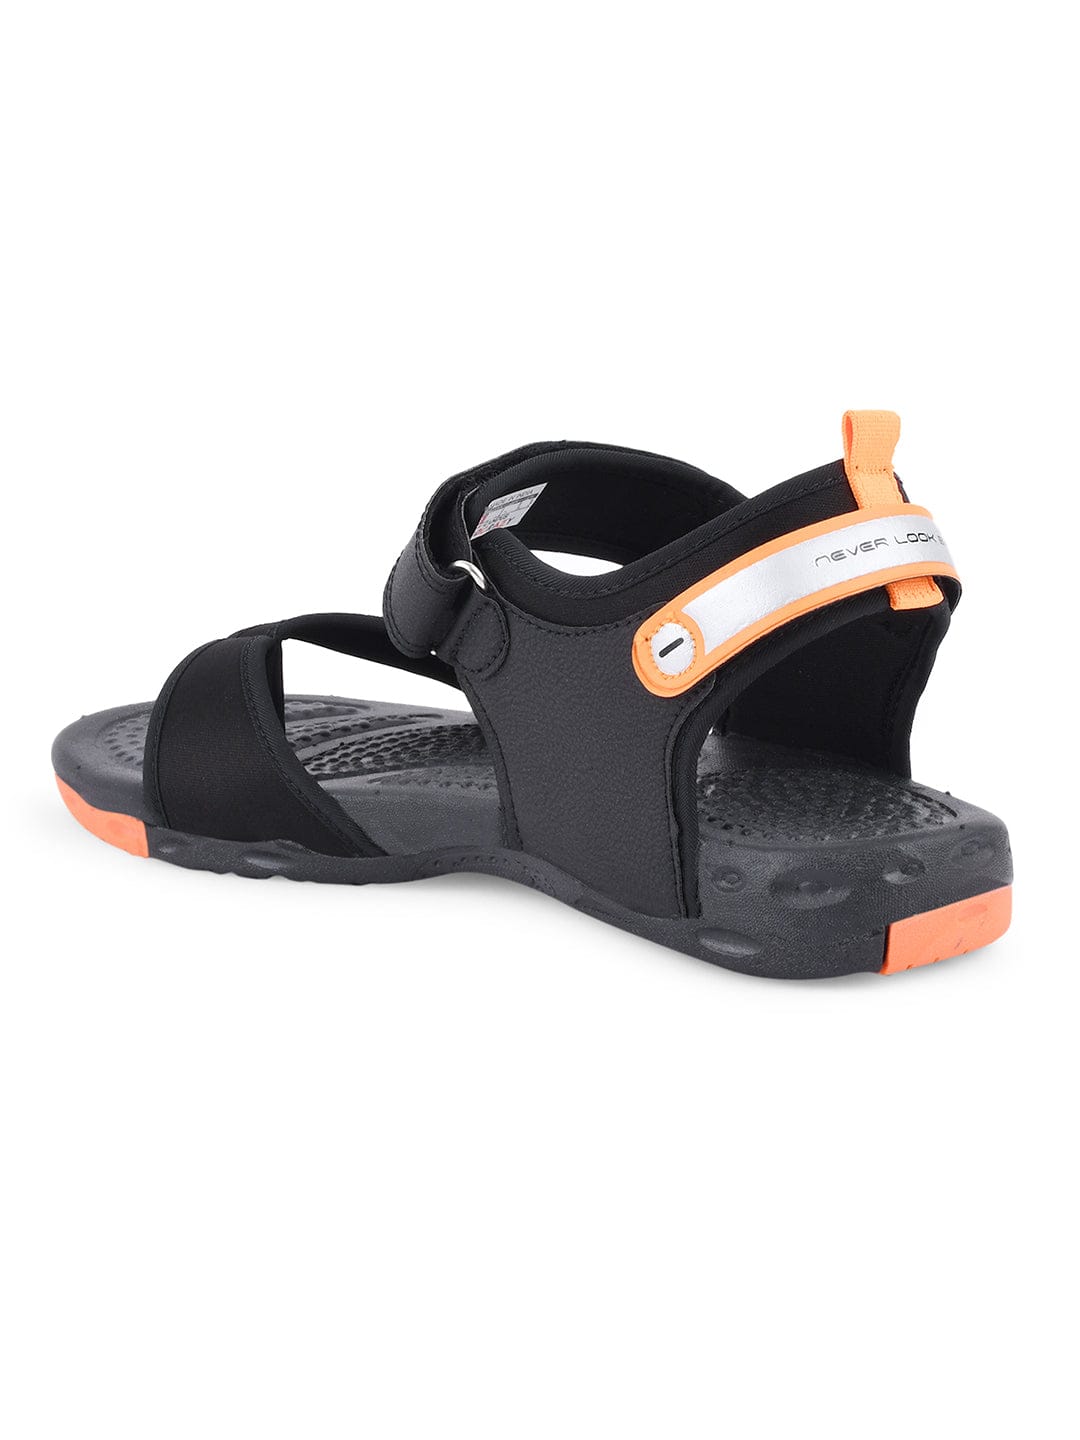 Professional Unisex Hotsale Beach Sandals For Men For Beach And Casual Wear  Flat Slippers With Hole Shoe Design For Men, Women, Gentlemen, And Children  From Sports_2028, $17.89 | DHgate.Com